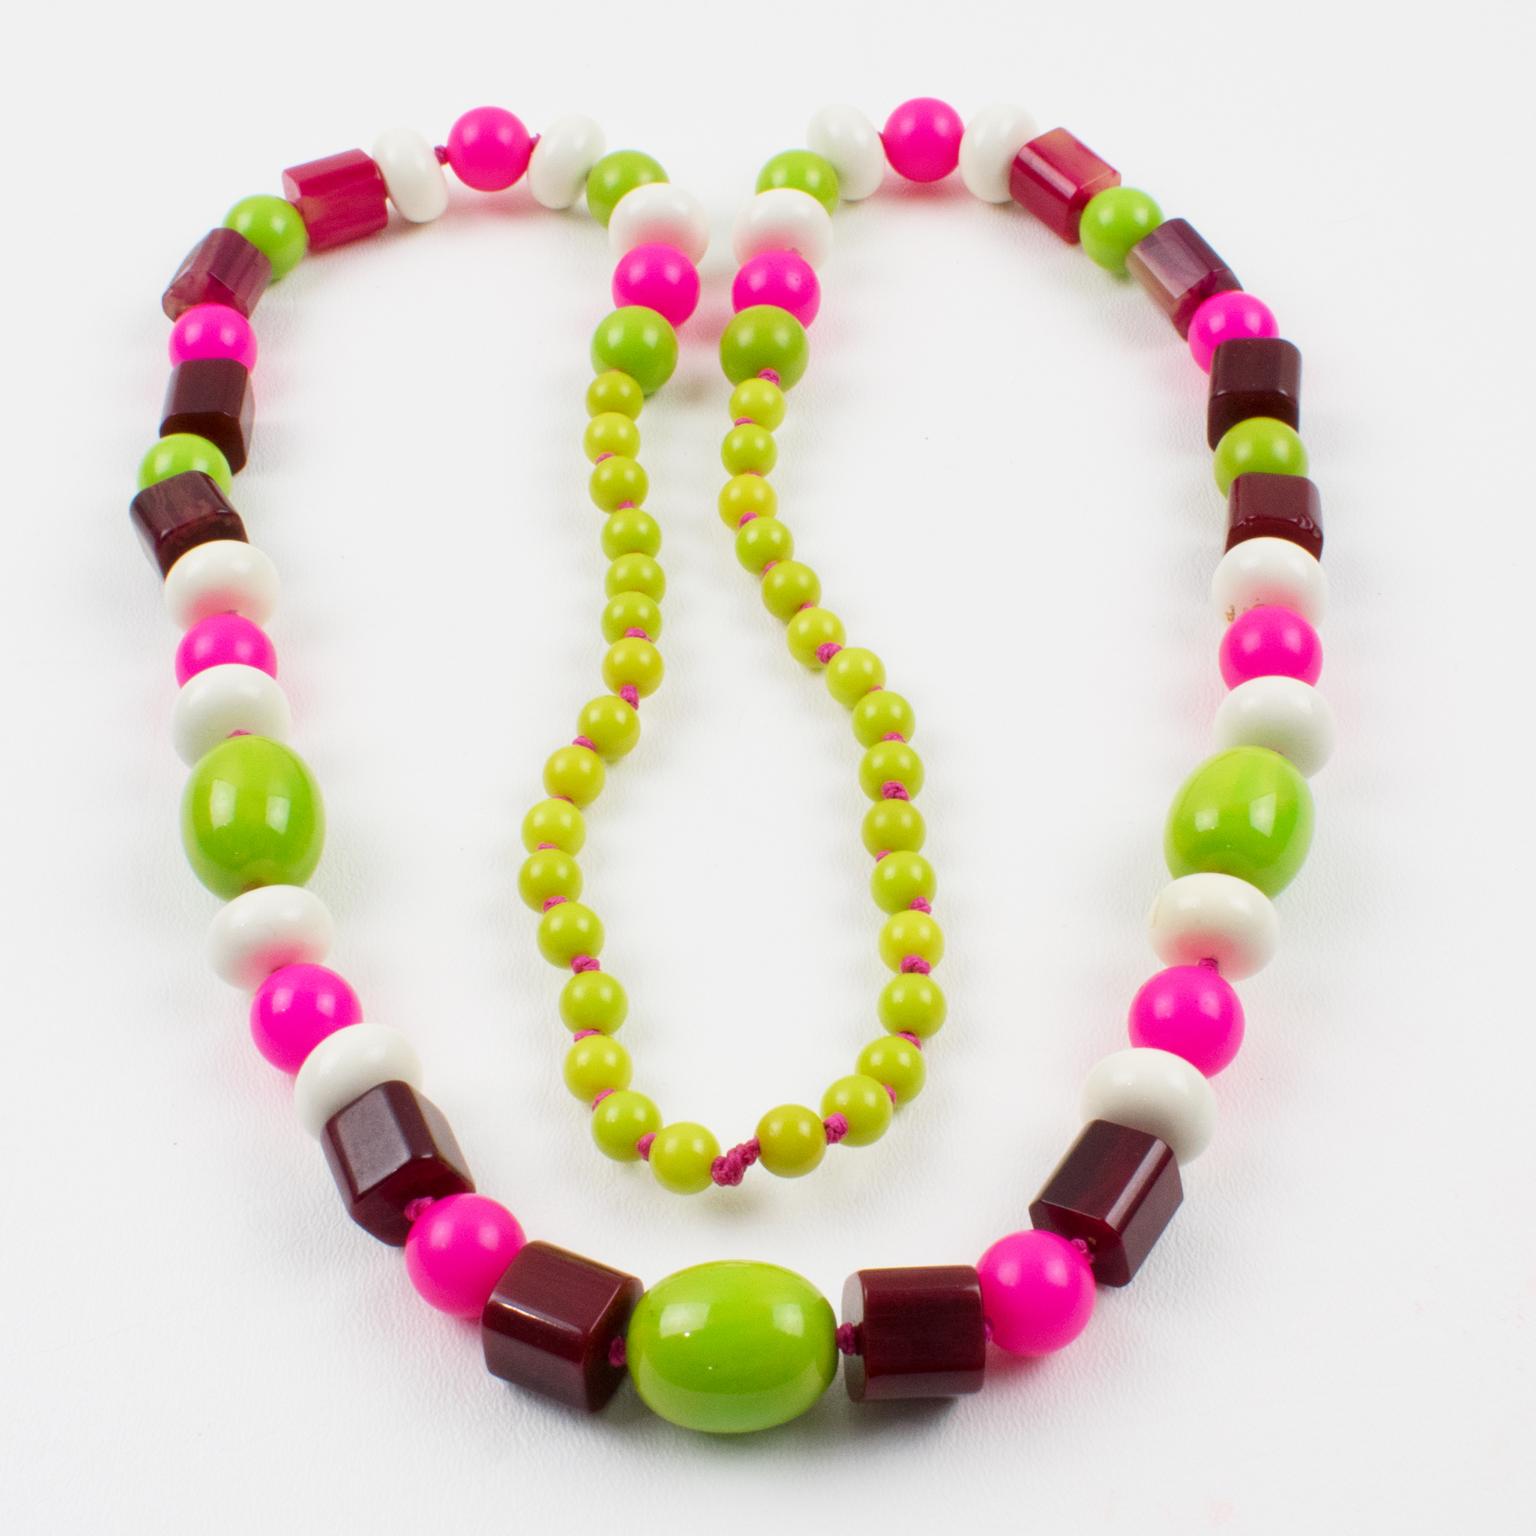 Playful extra-long Bakelite and Lucite beaded necklace. Assorted beads in various shapes: round, square stick, tomato, and ovoid. Mix and match flashy colors, apple green marble, hot pink, fuchsia, and custard marble contrasted with white Lucite